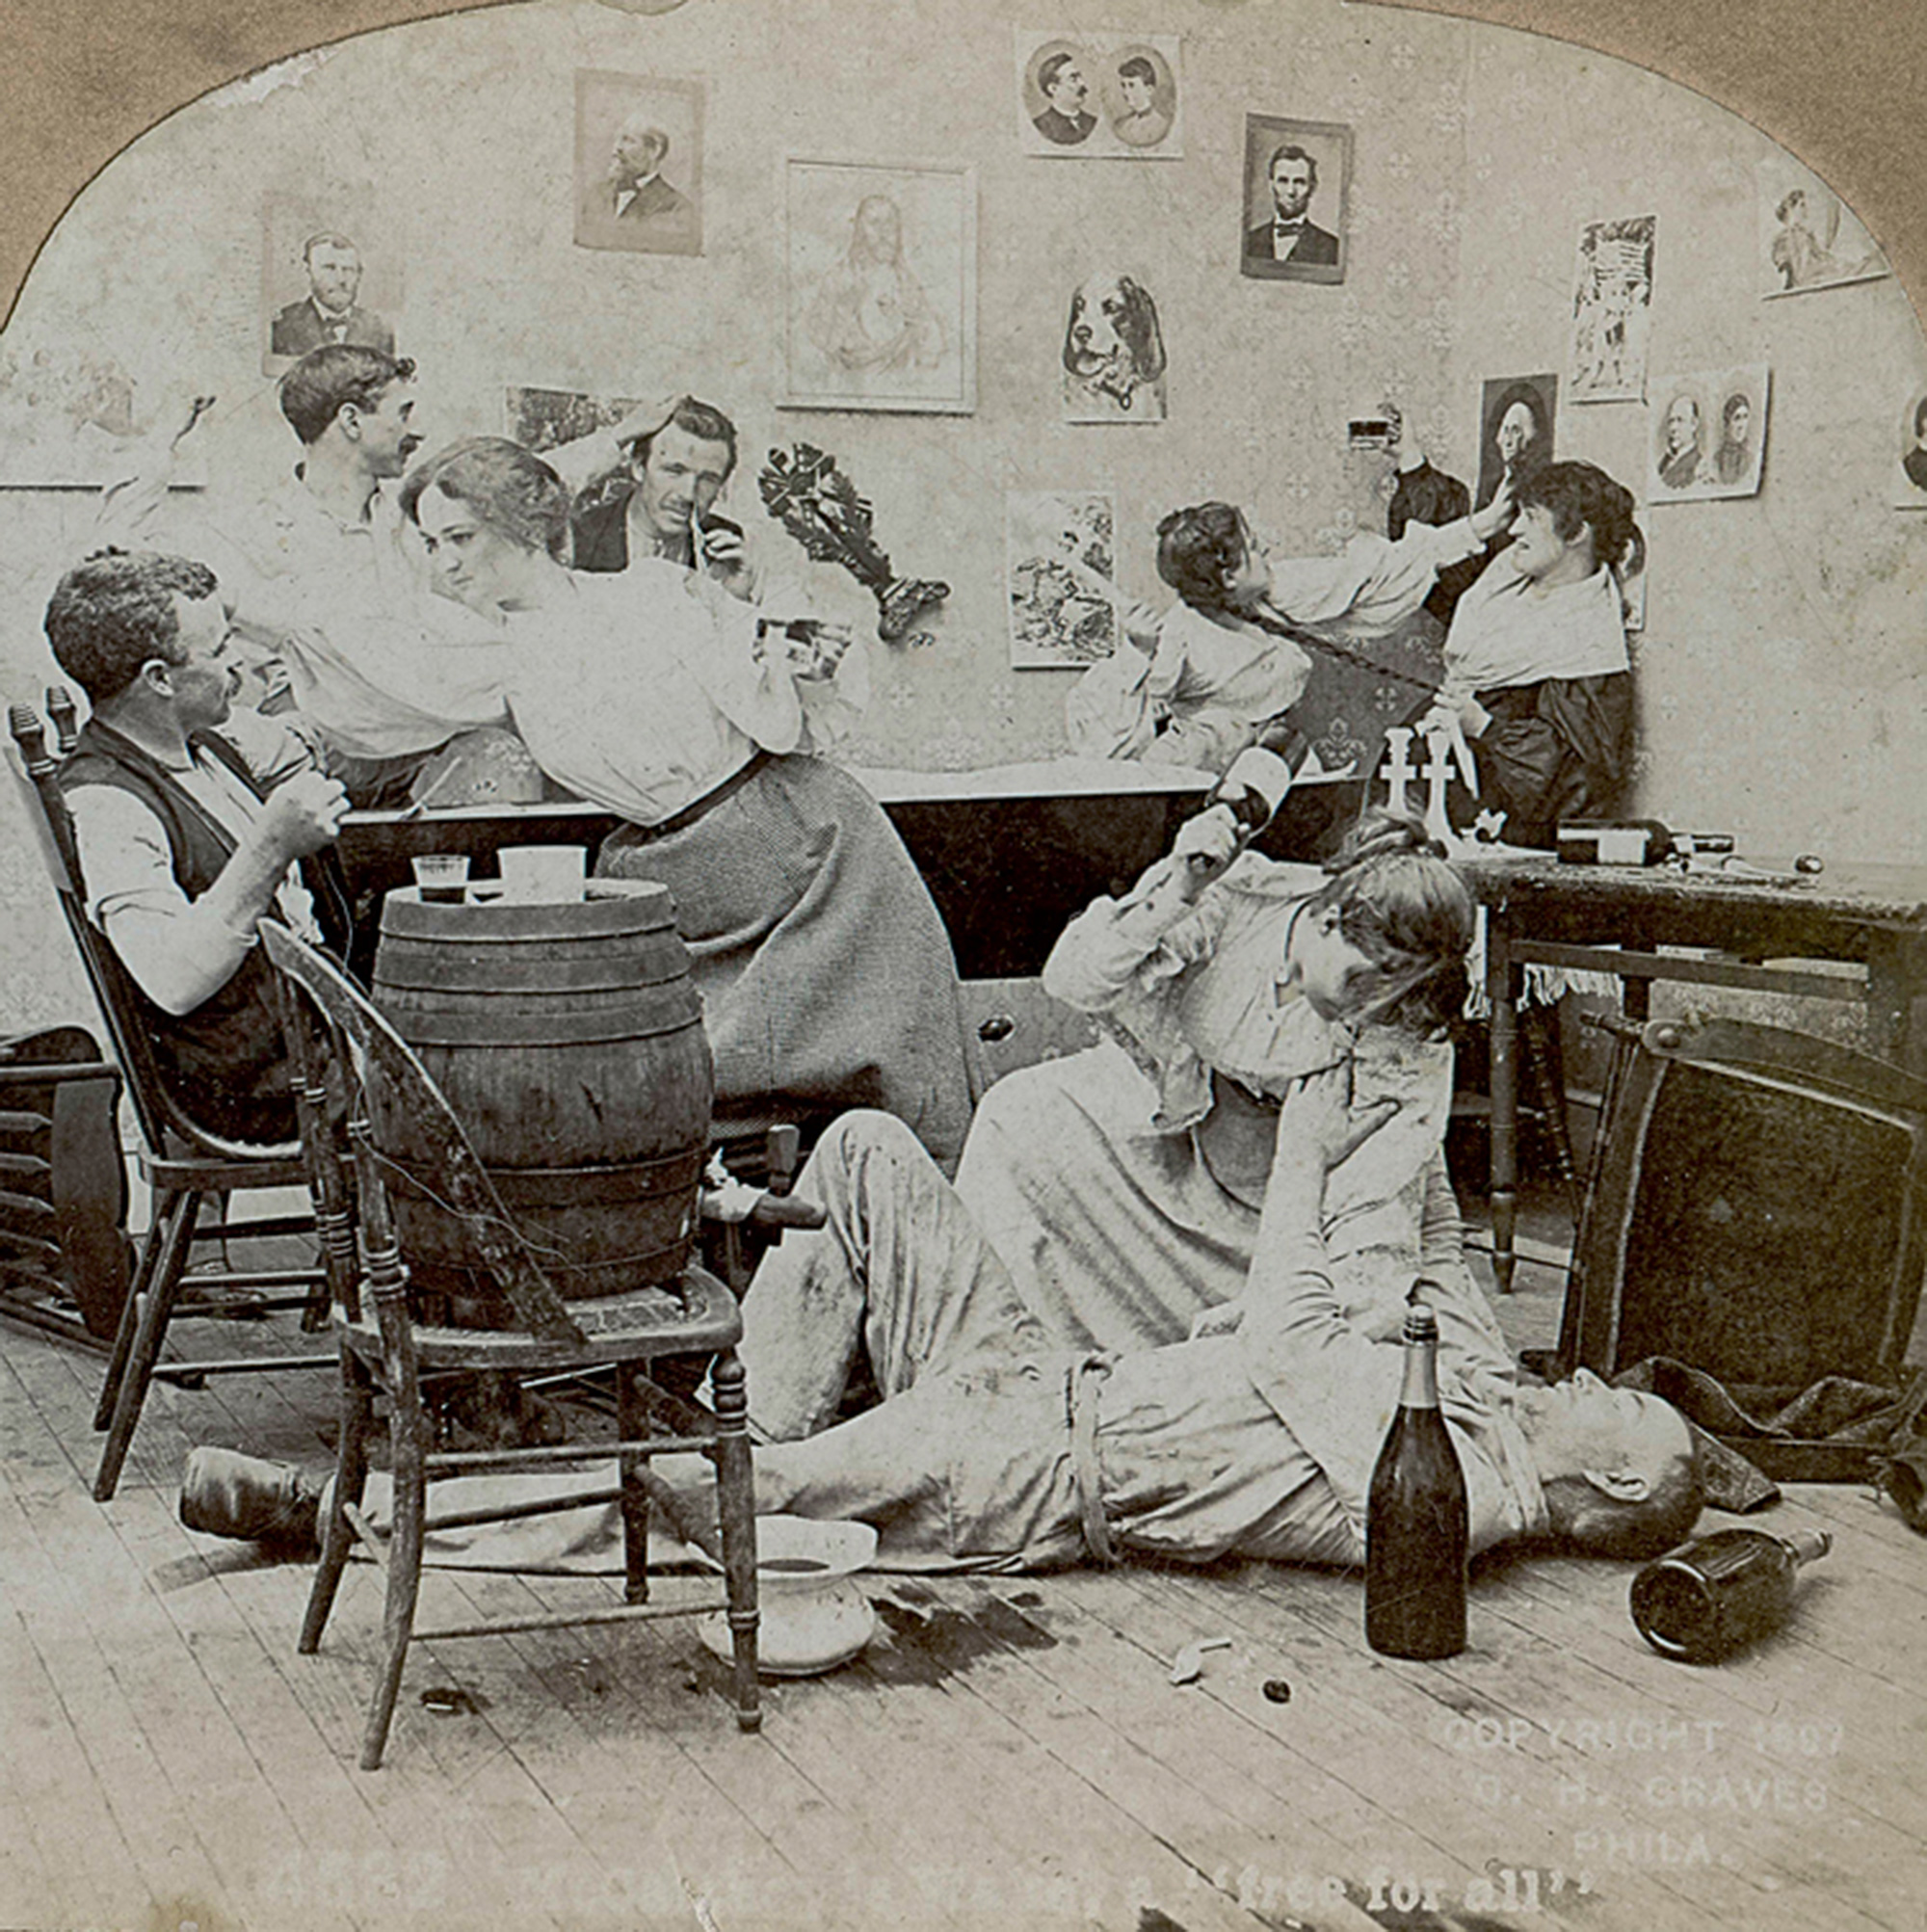 A reenactment of an Irish wake on a stereoview card published in Philadelphia in 1897. Faint text on bottom reads: “McCarthy’s Wake, a ‘free for all.’” Courtesy Mike Pecosky.